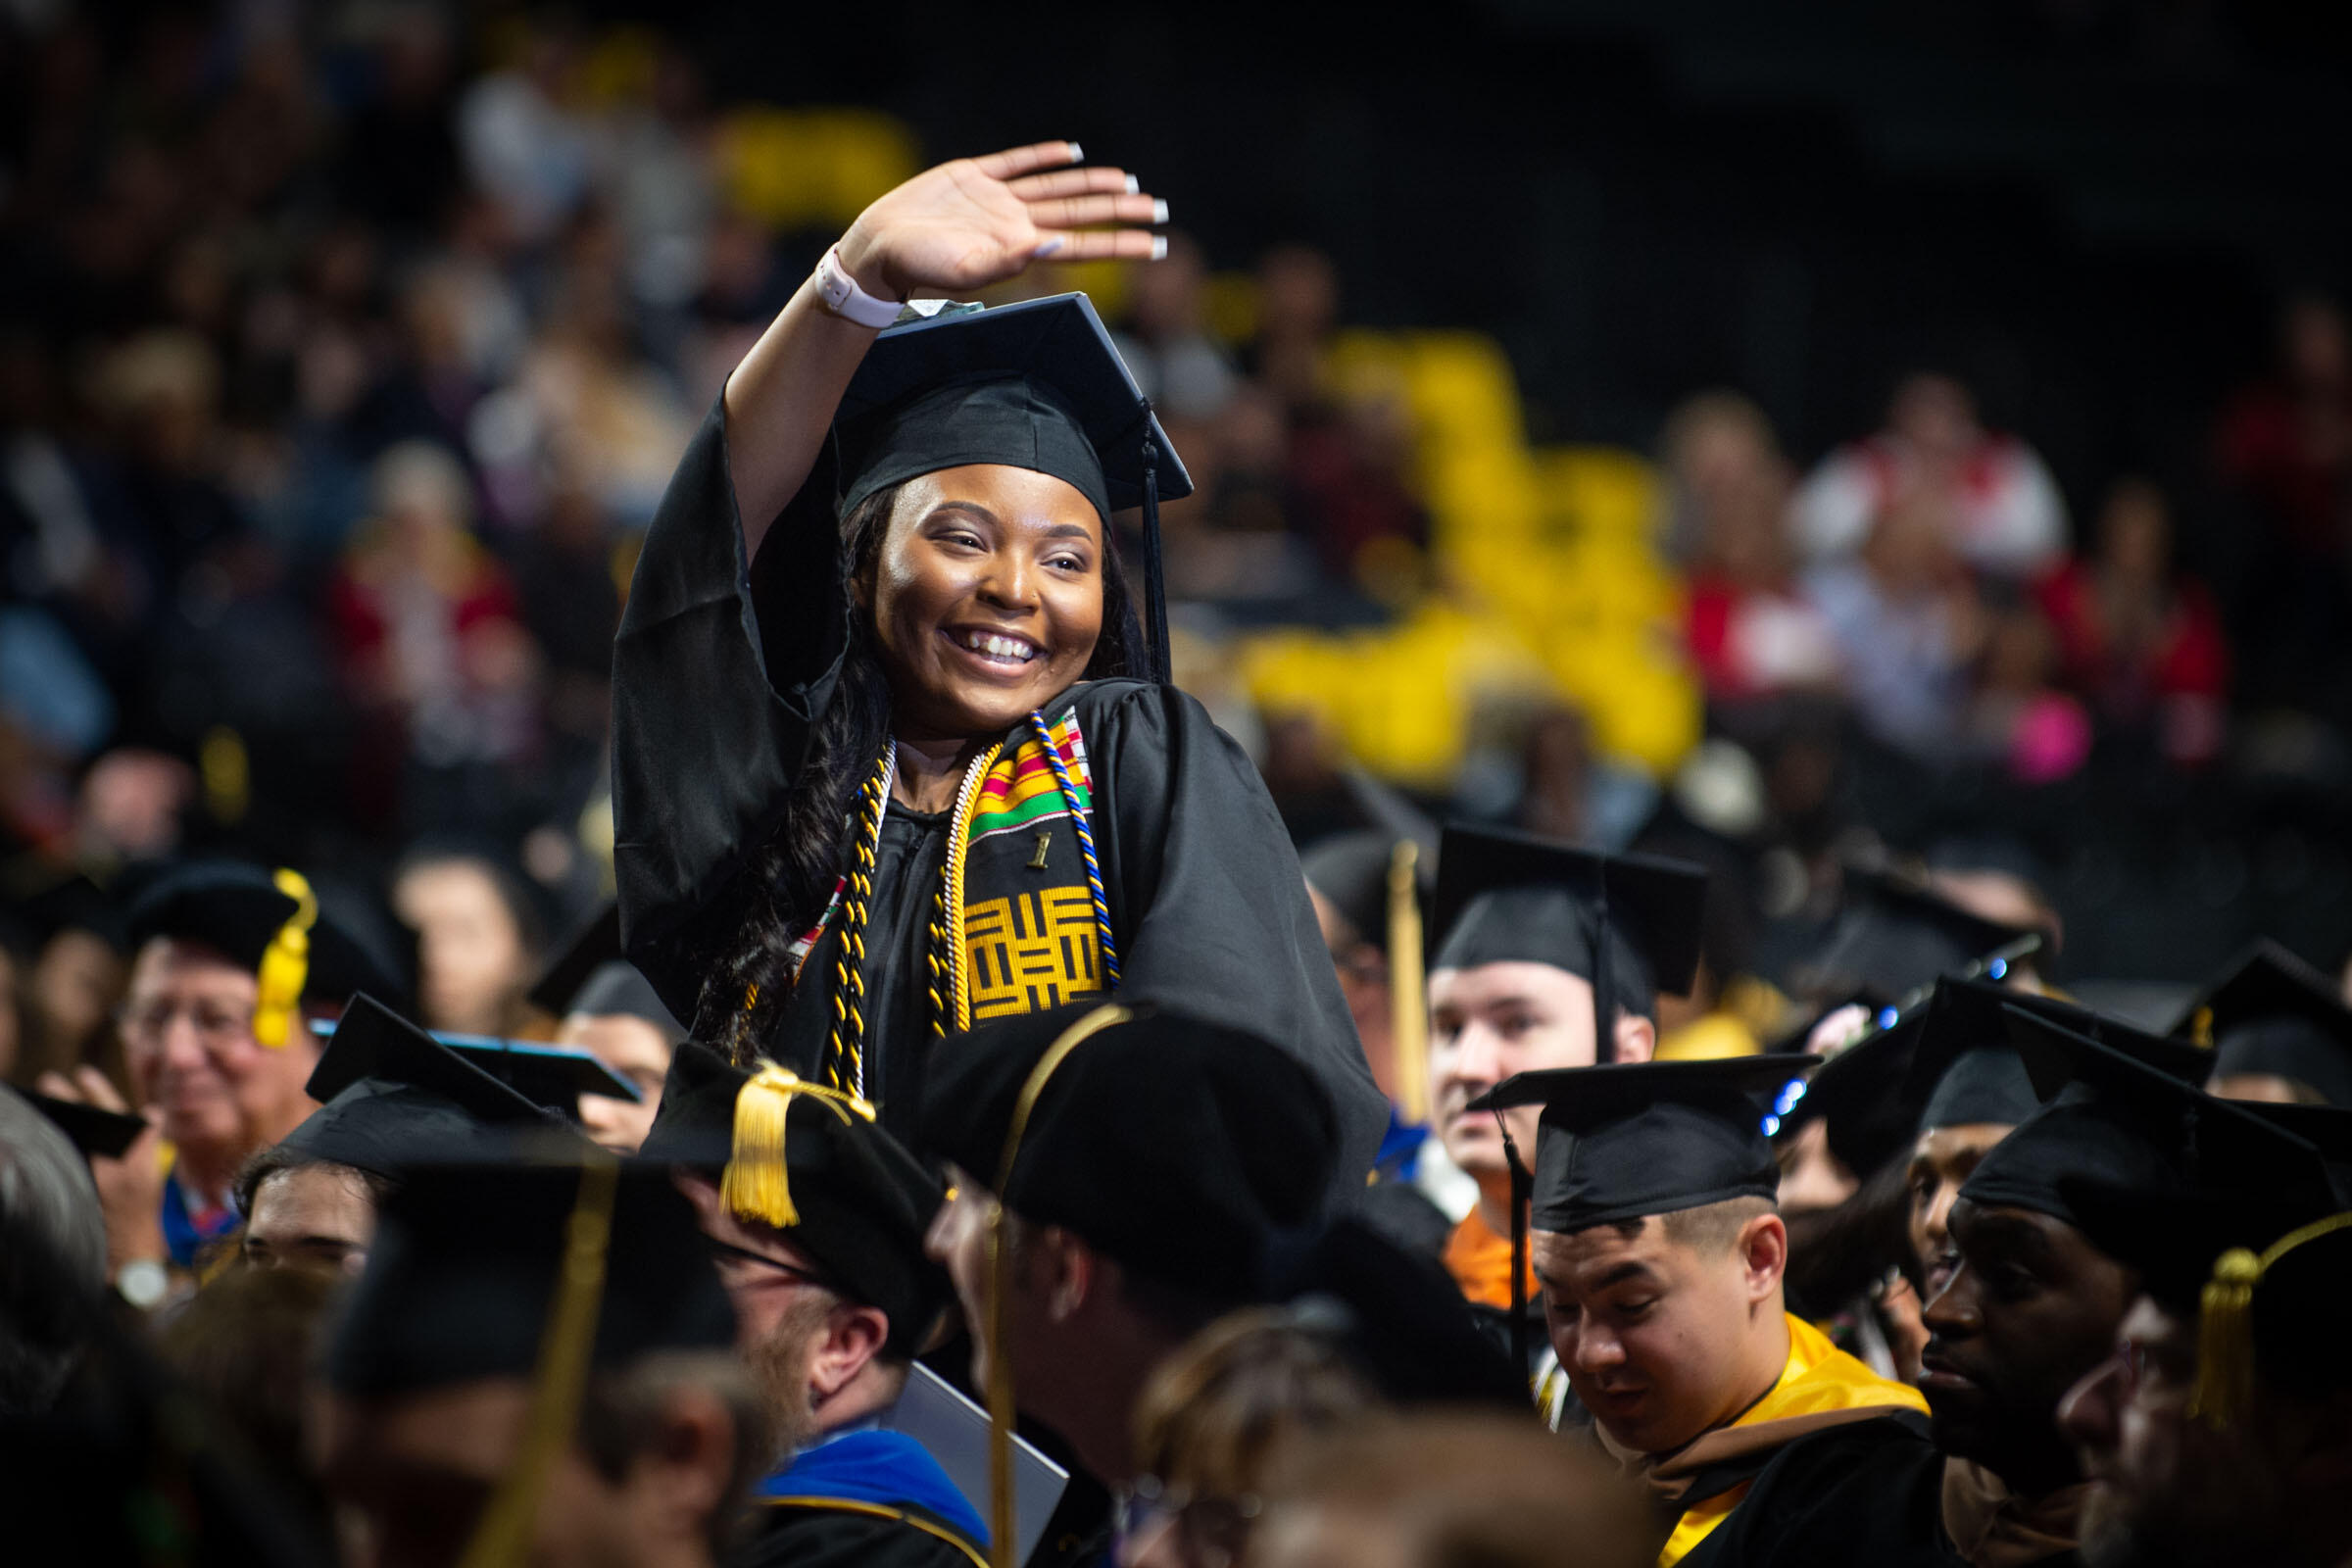 A student standing and waving during the commencement ceremony.